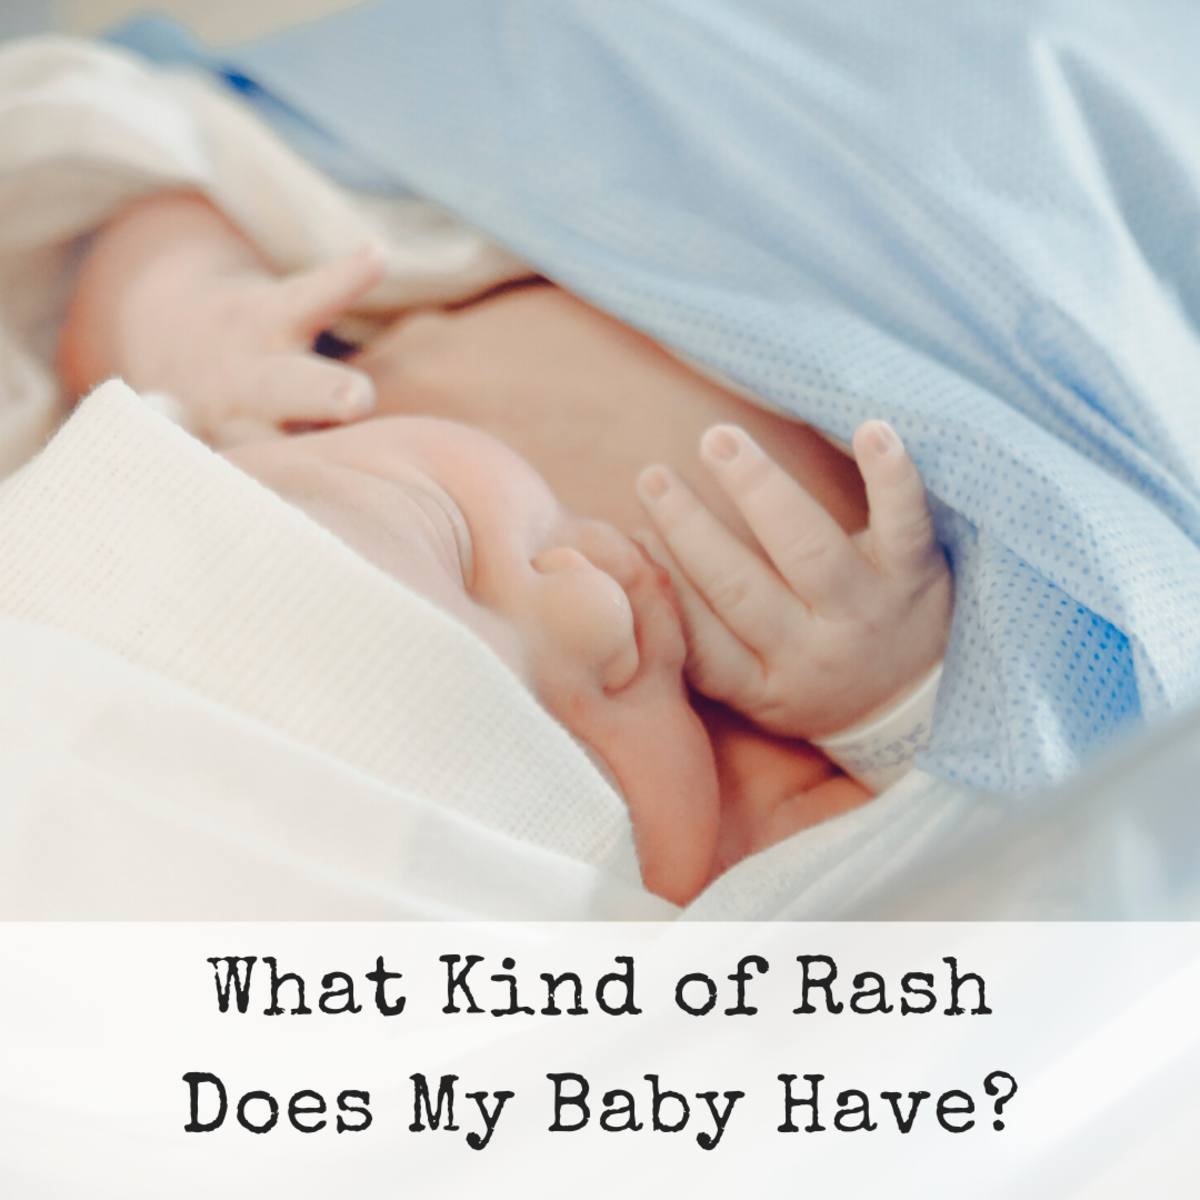 Discovering your infant has a rash can cause panic. What is it? Do you need to call a doctor? Here are four of the most common rashes. 